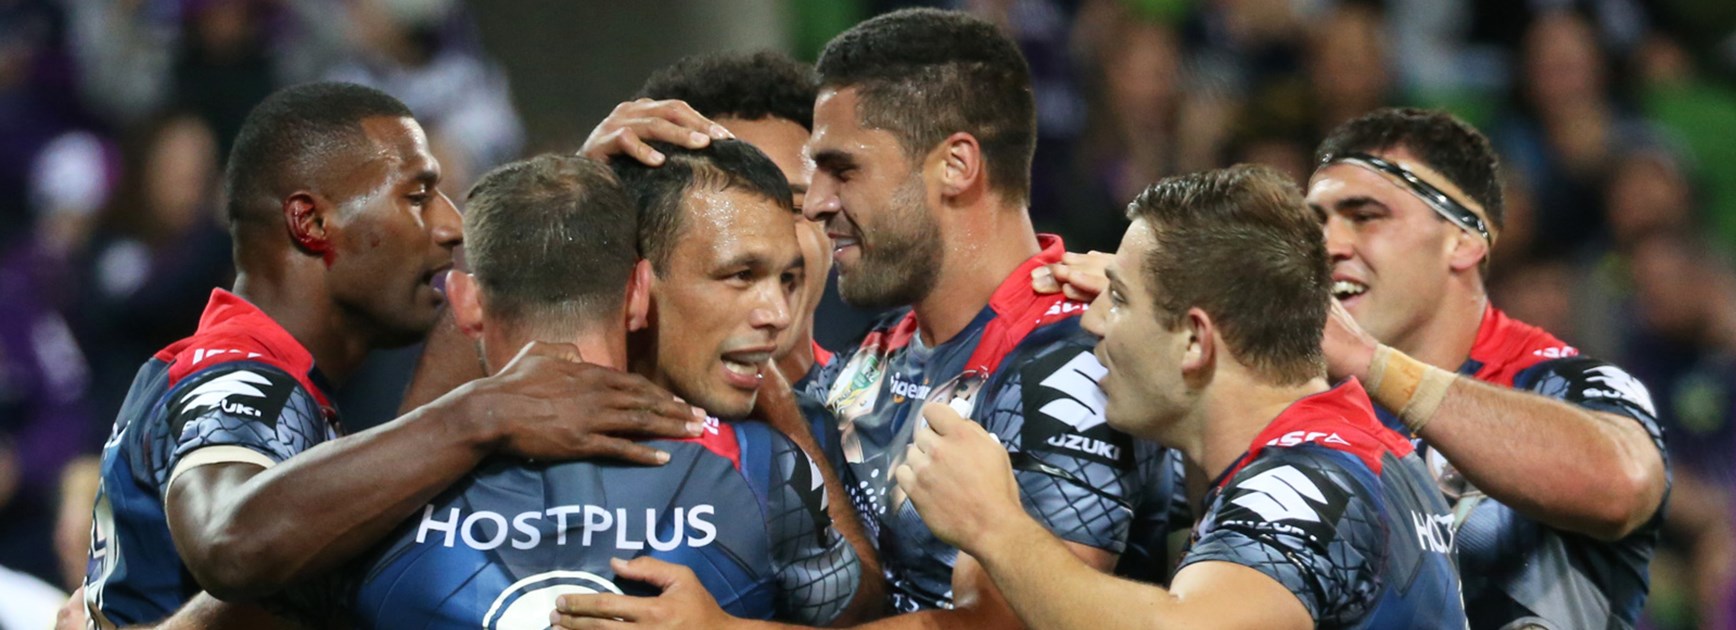 The Storm celebrate a first-half try against the Panthers on Saturday night.